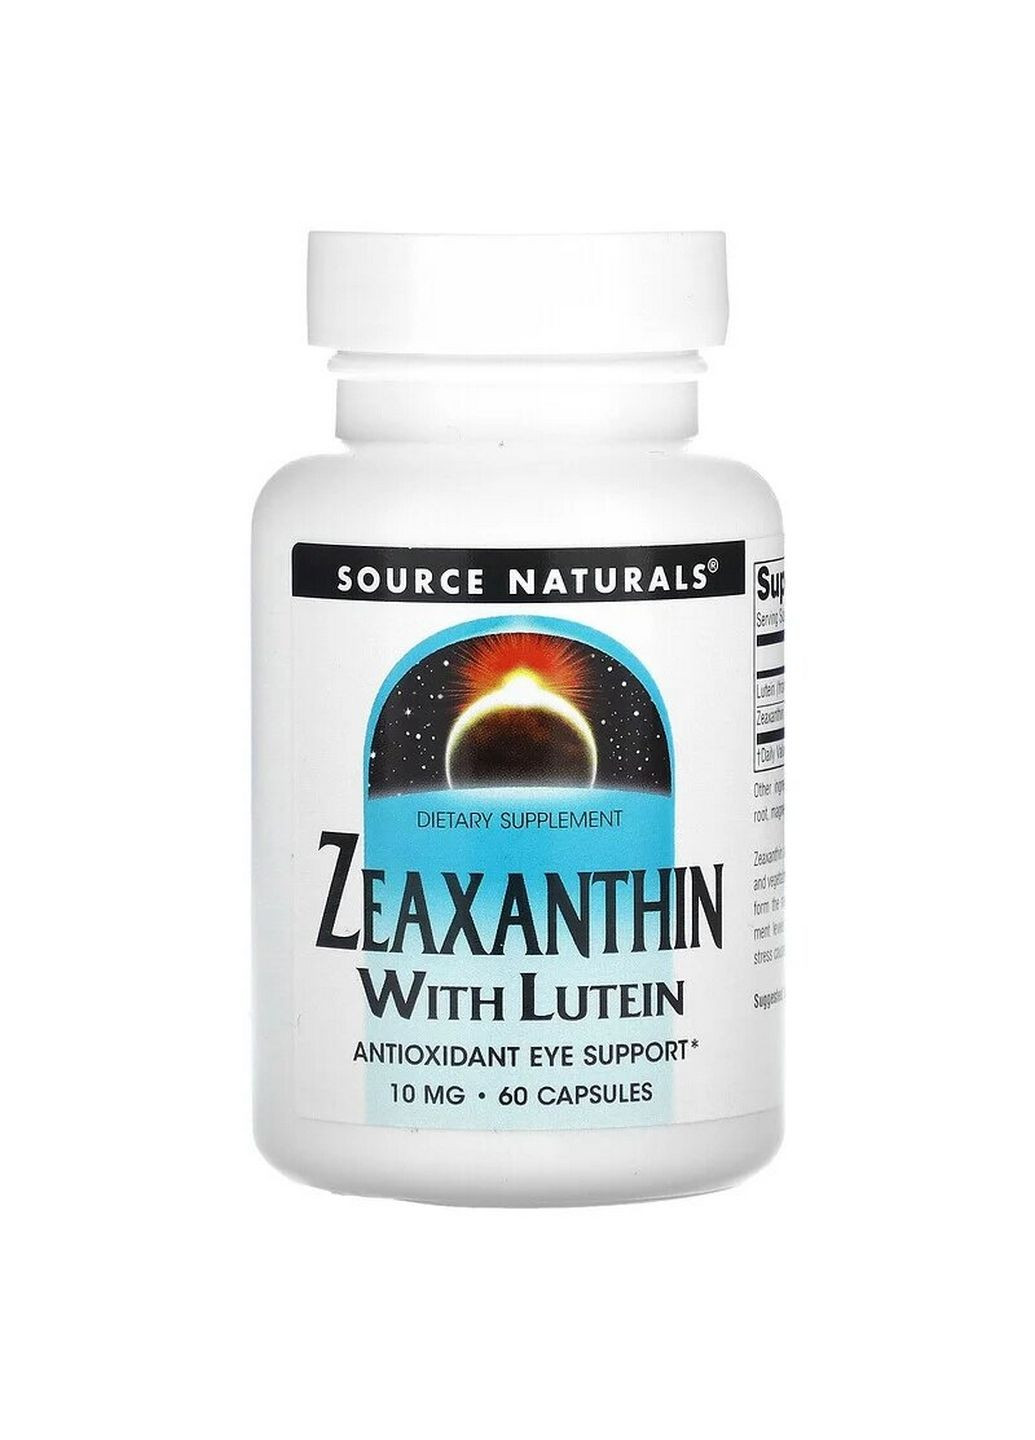 Натуральна добавка Zeaxanthin with Lutein 10 mg, 60 капсул Source Naturals (293418005)